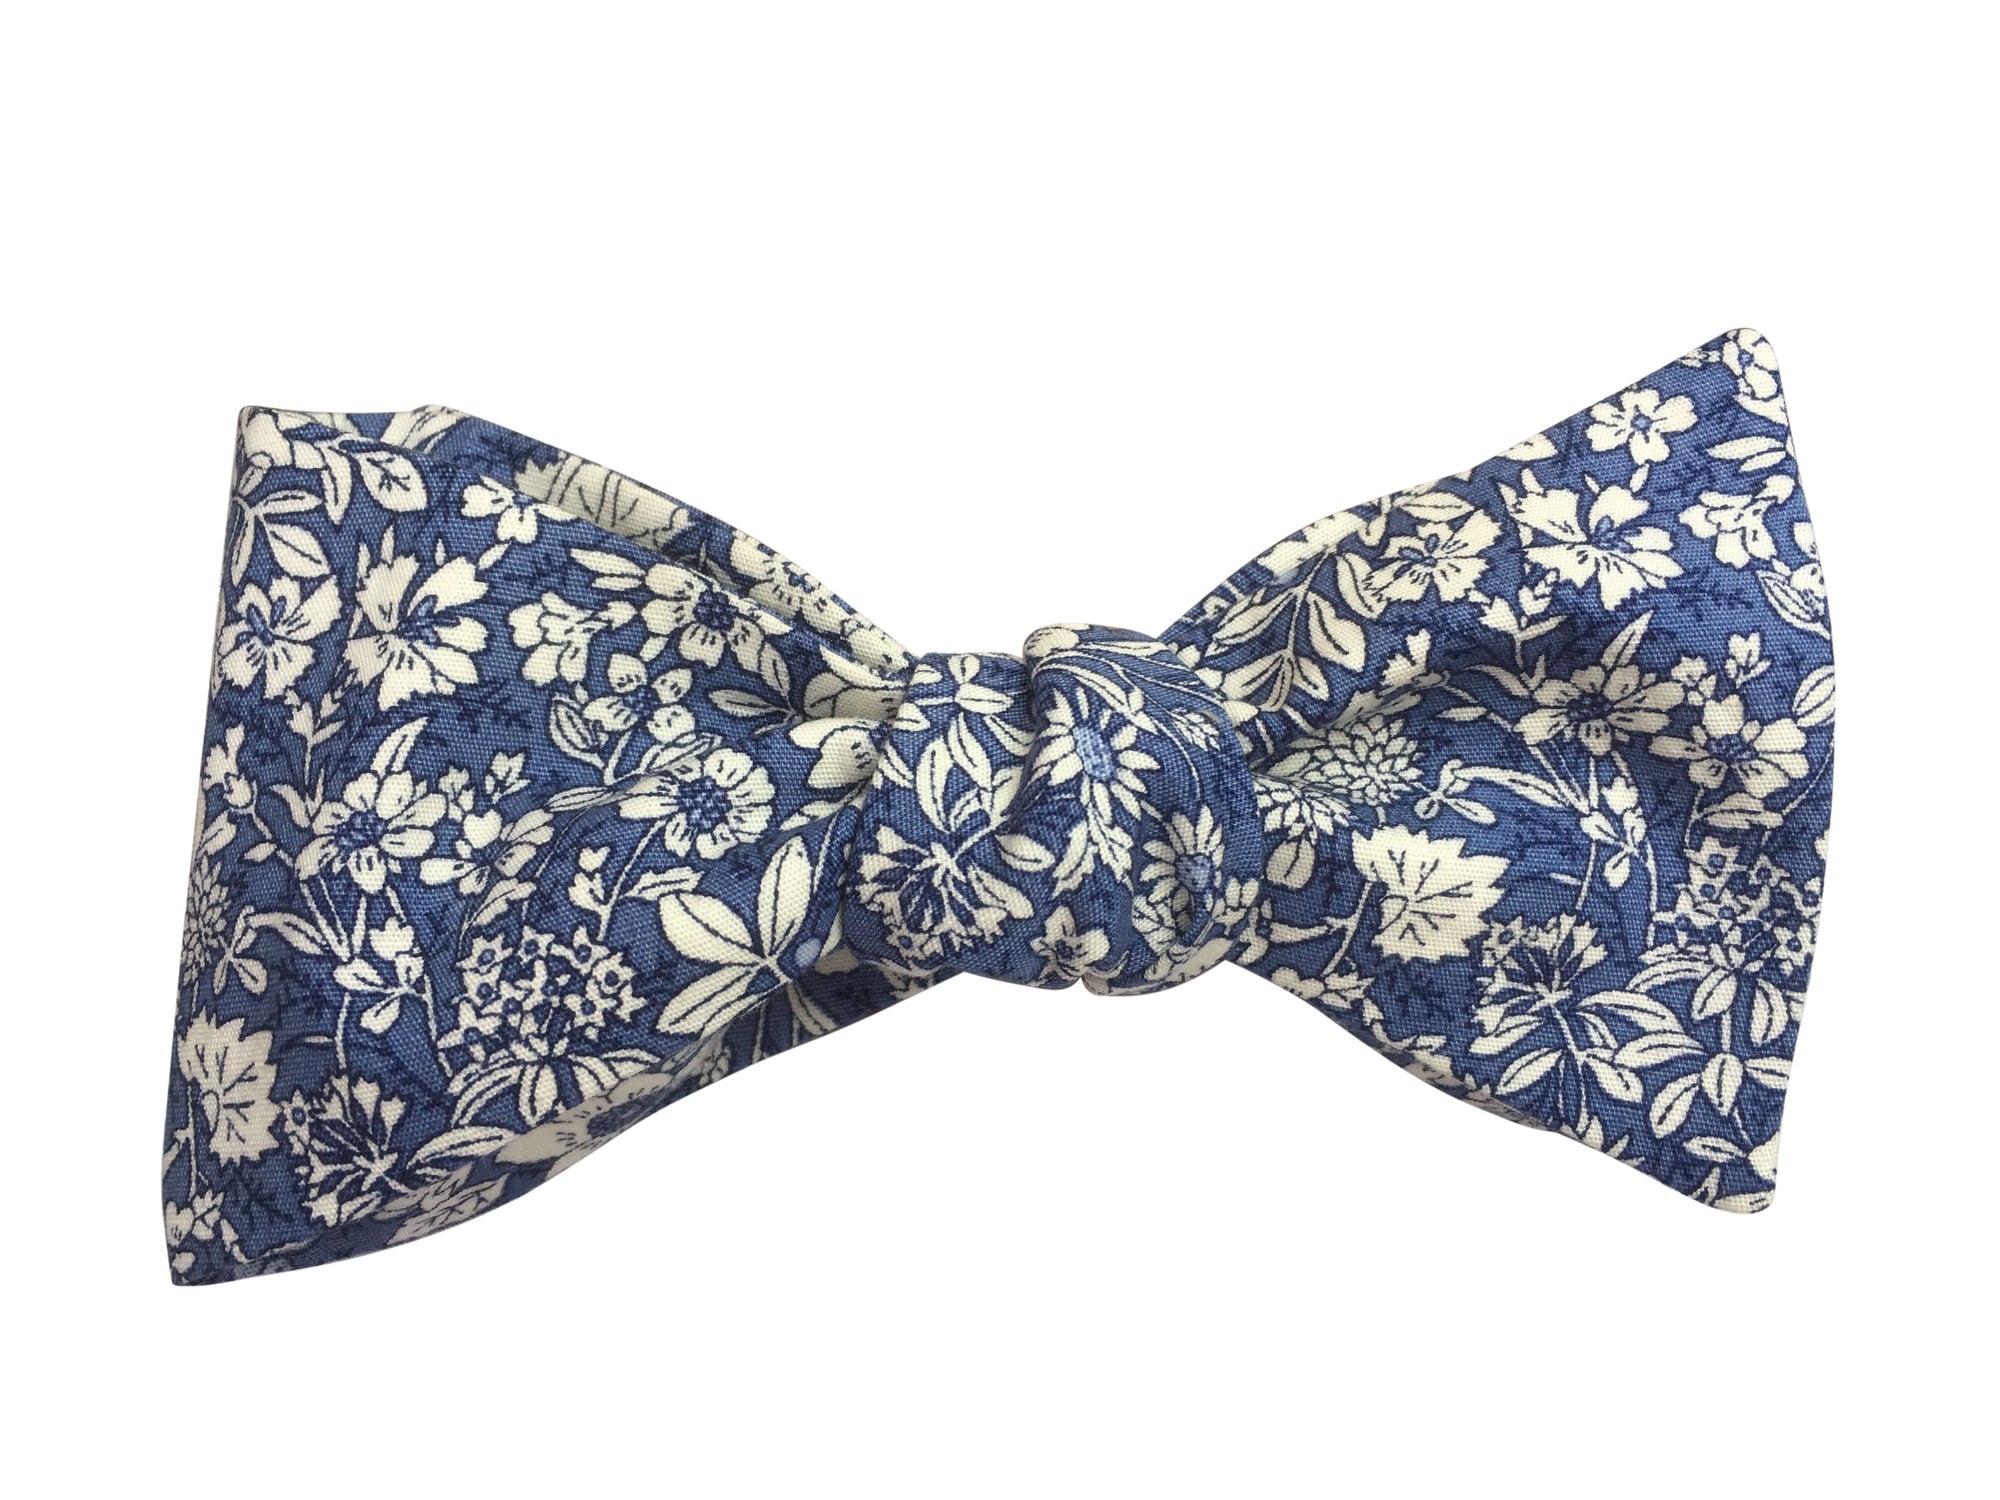 Floral Bow Ties - Unique Handmade Floral Design Bow Ties - Blue Eyes ...